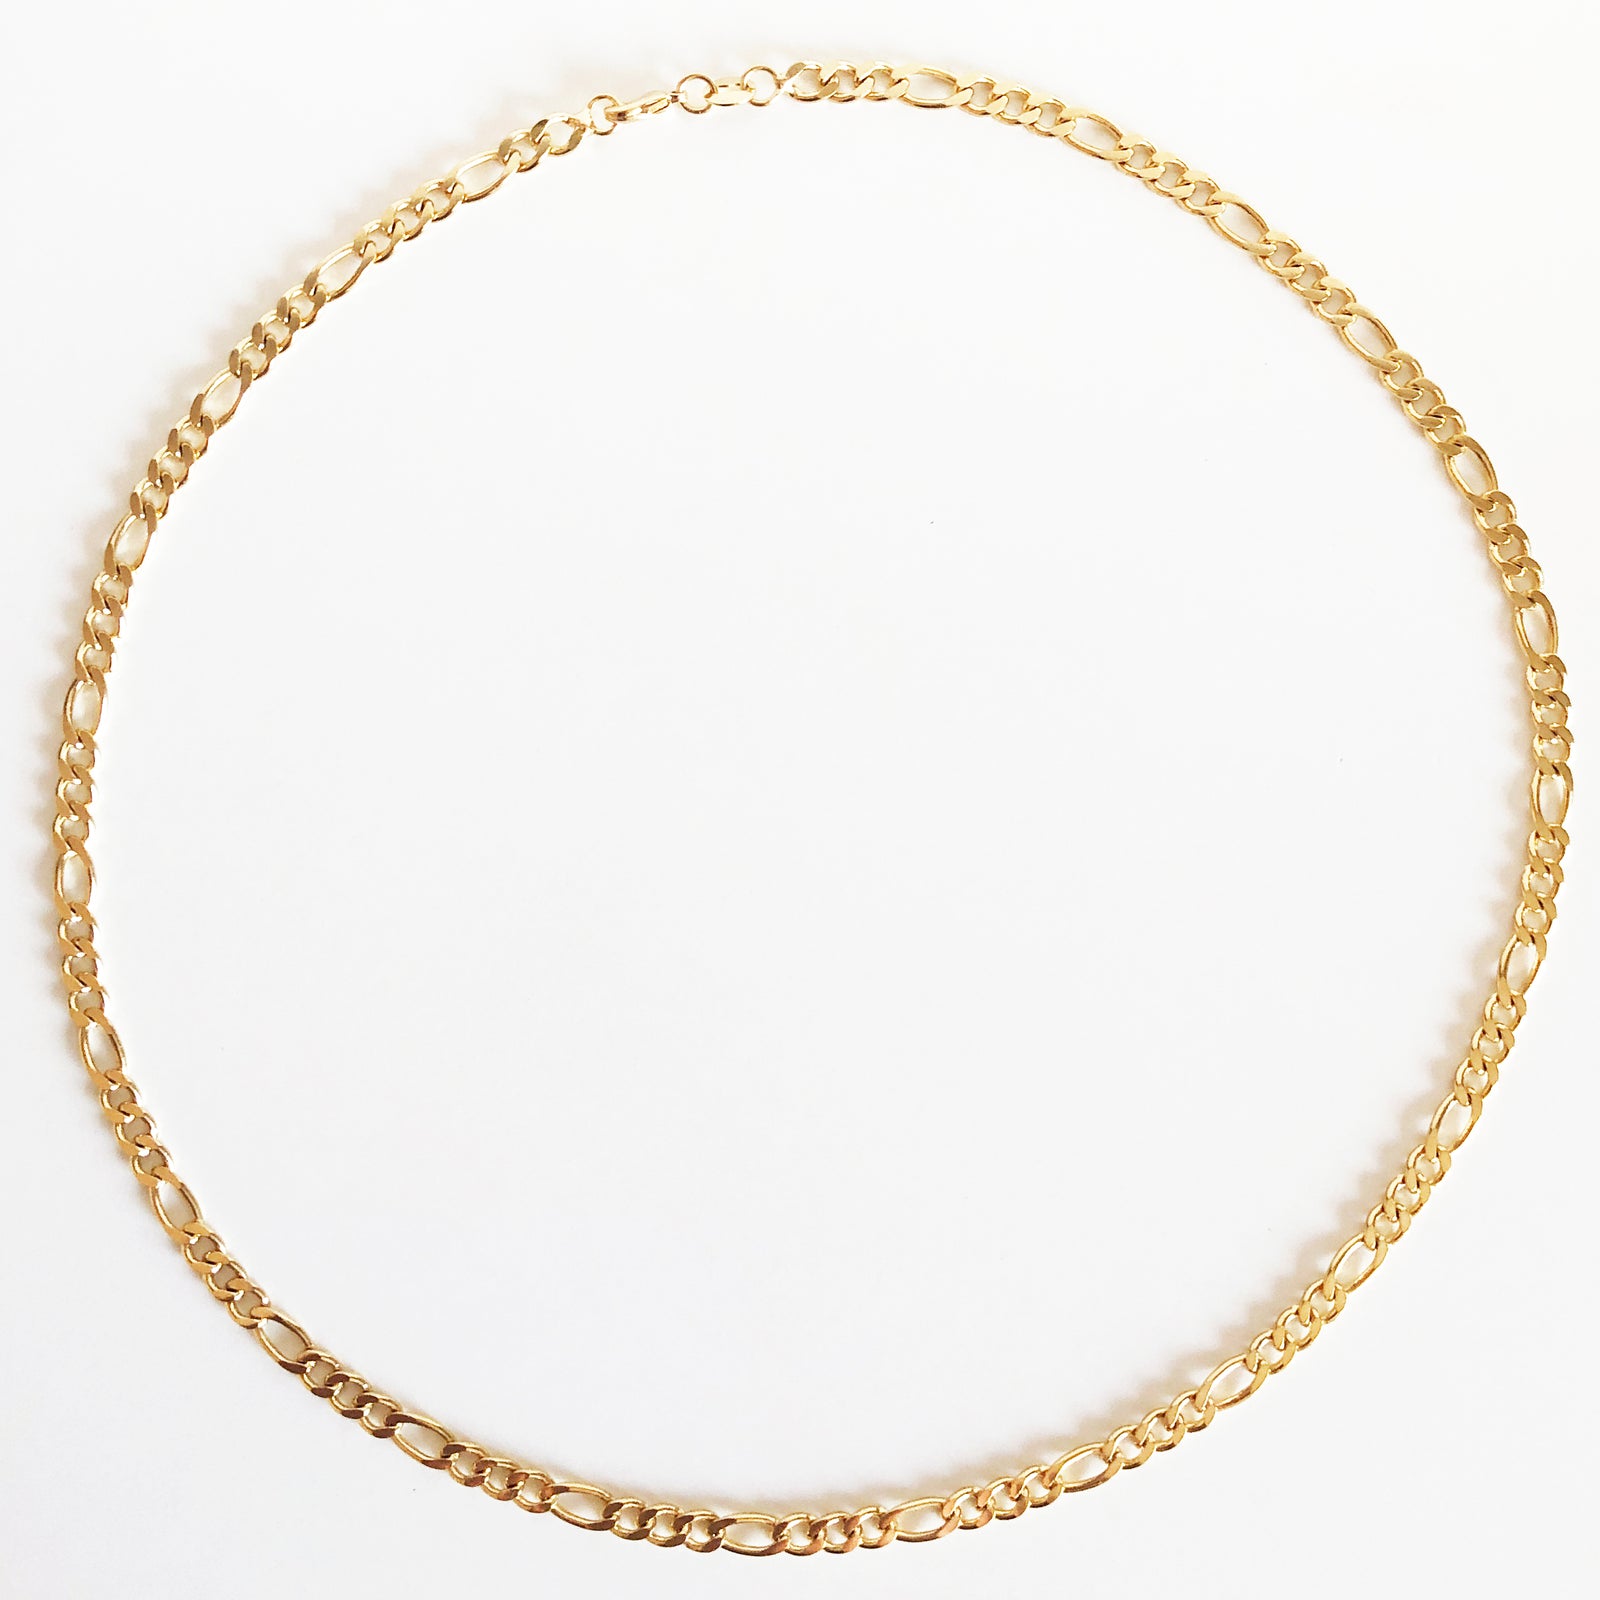 Gold Figaro chain necklace